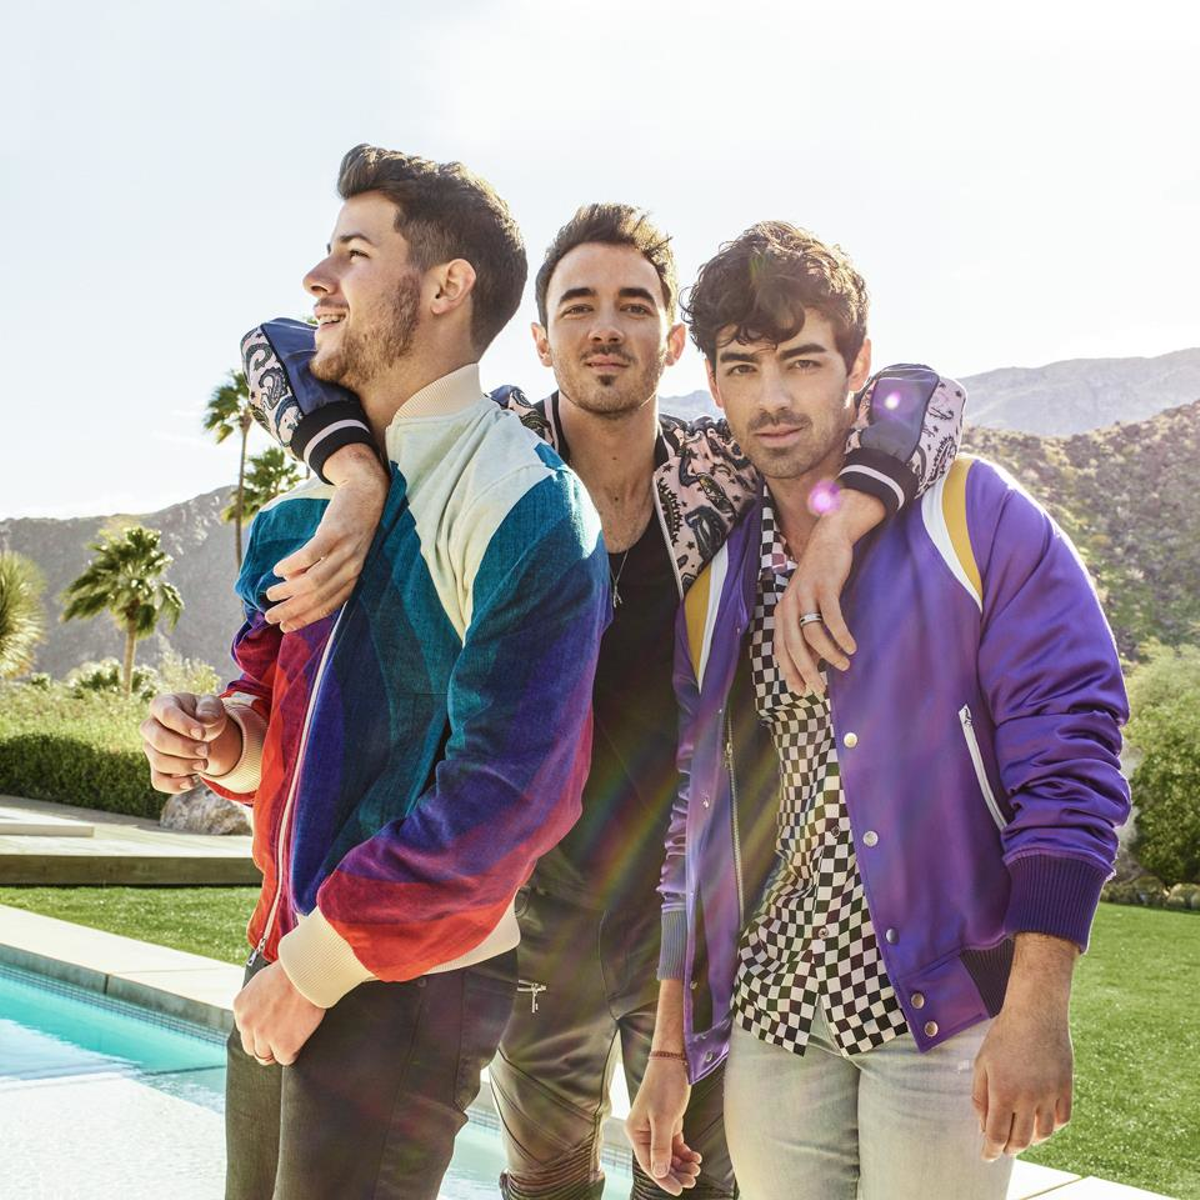 Jonas Brothers comeback tour hits Tampa’a Amalie Arena on August 10